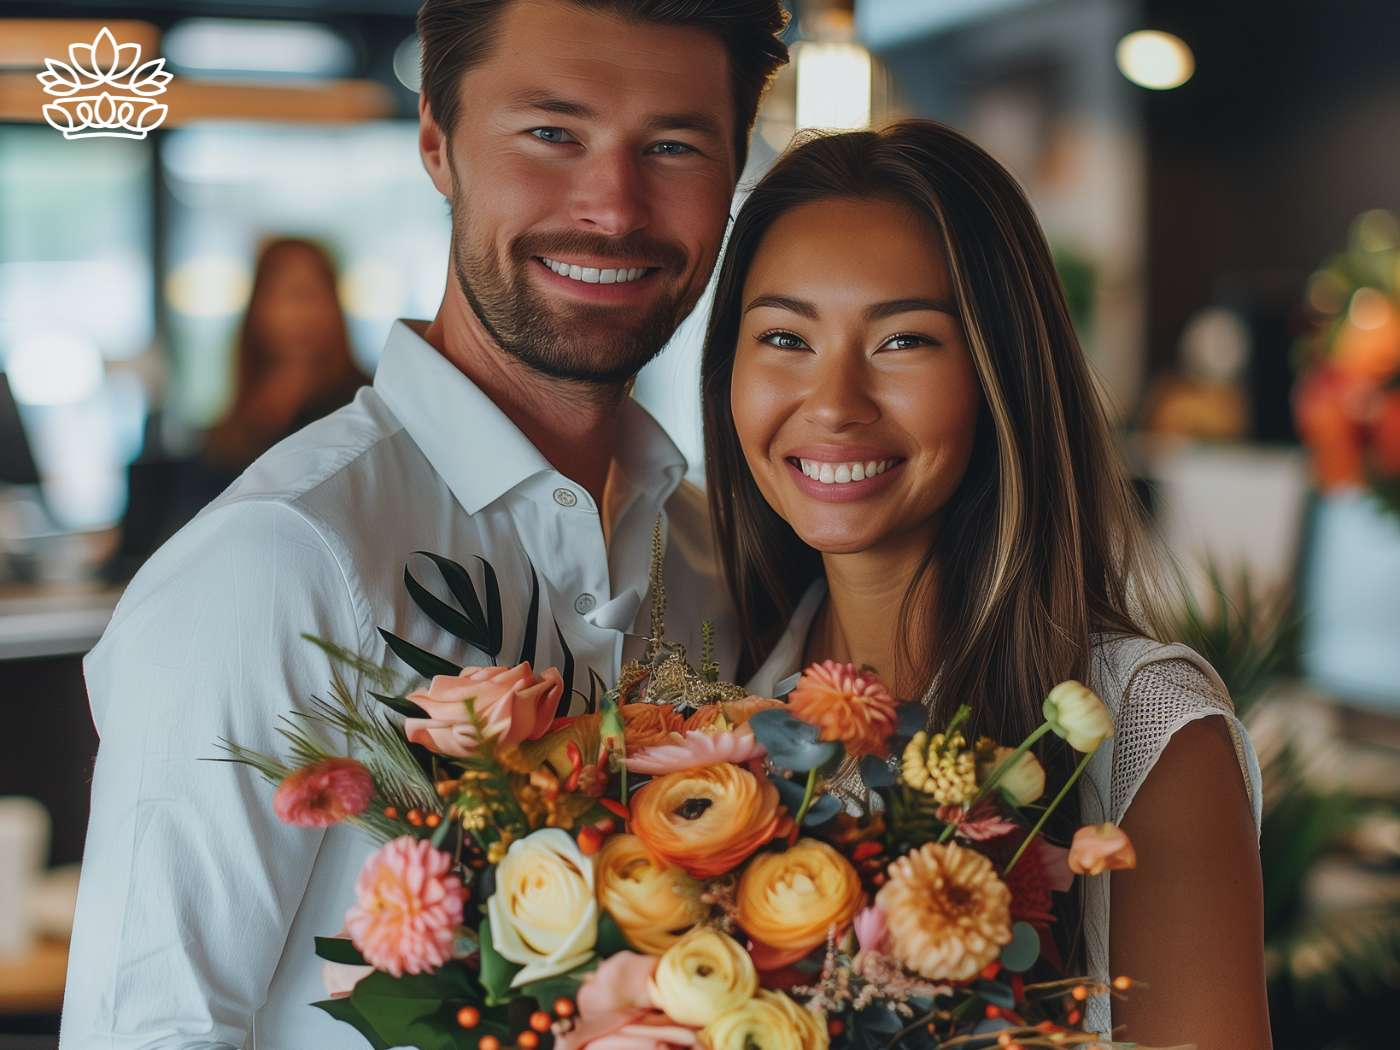 A cheerful colleagues embracing, with the woman holding a stunning bouquet of orange and peach roses, symbolizing the joyous moments celebrated at Fabulous Flowers and Gifts.